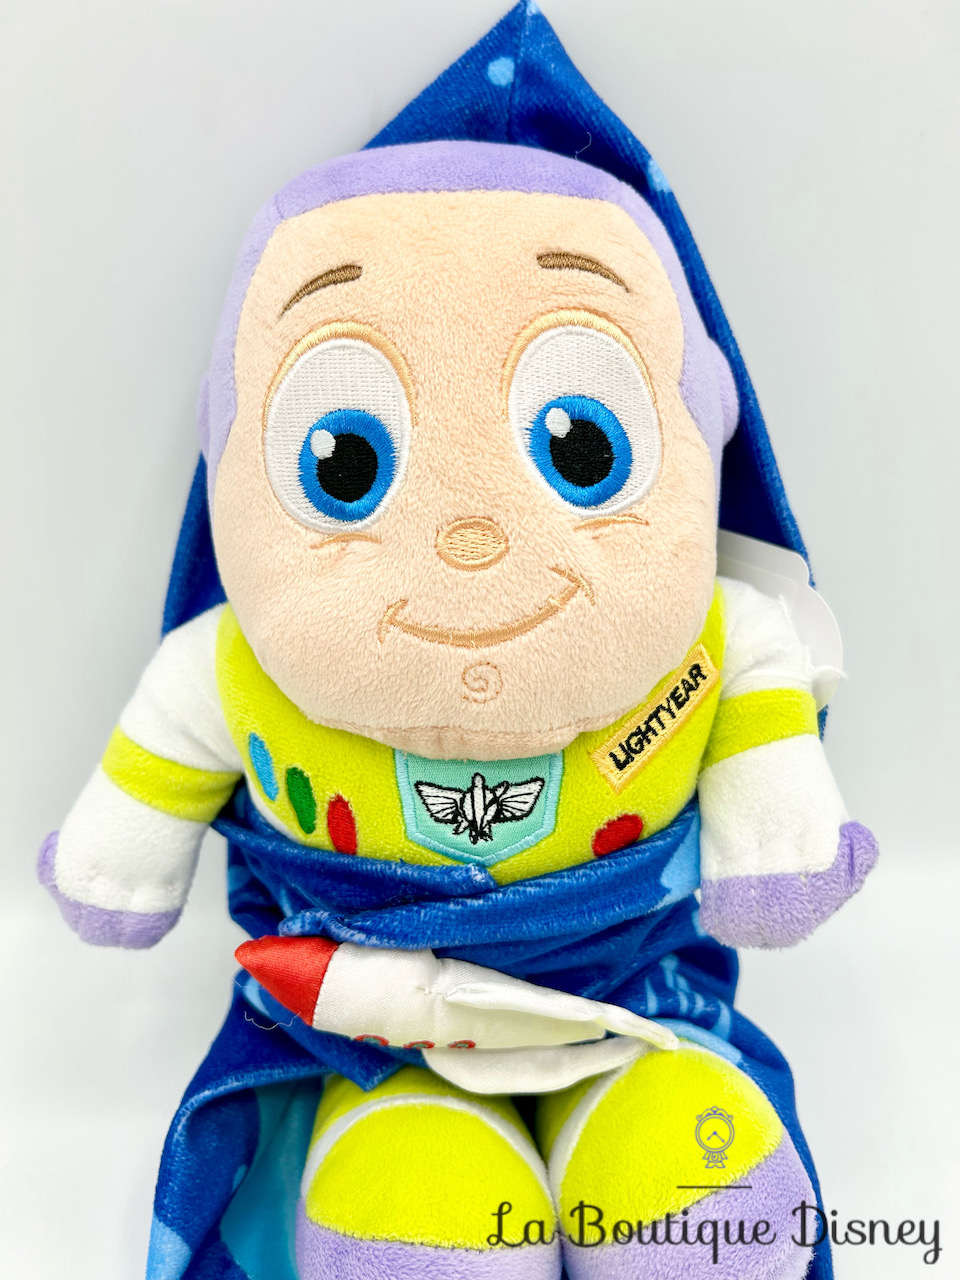 peluche-buzz-éclair-disney-babies-disneyland-couverture-couffin-toy-story-0